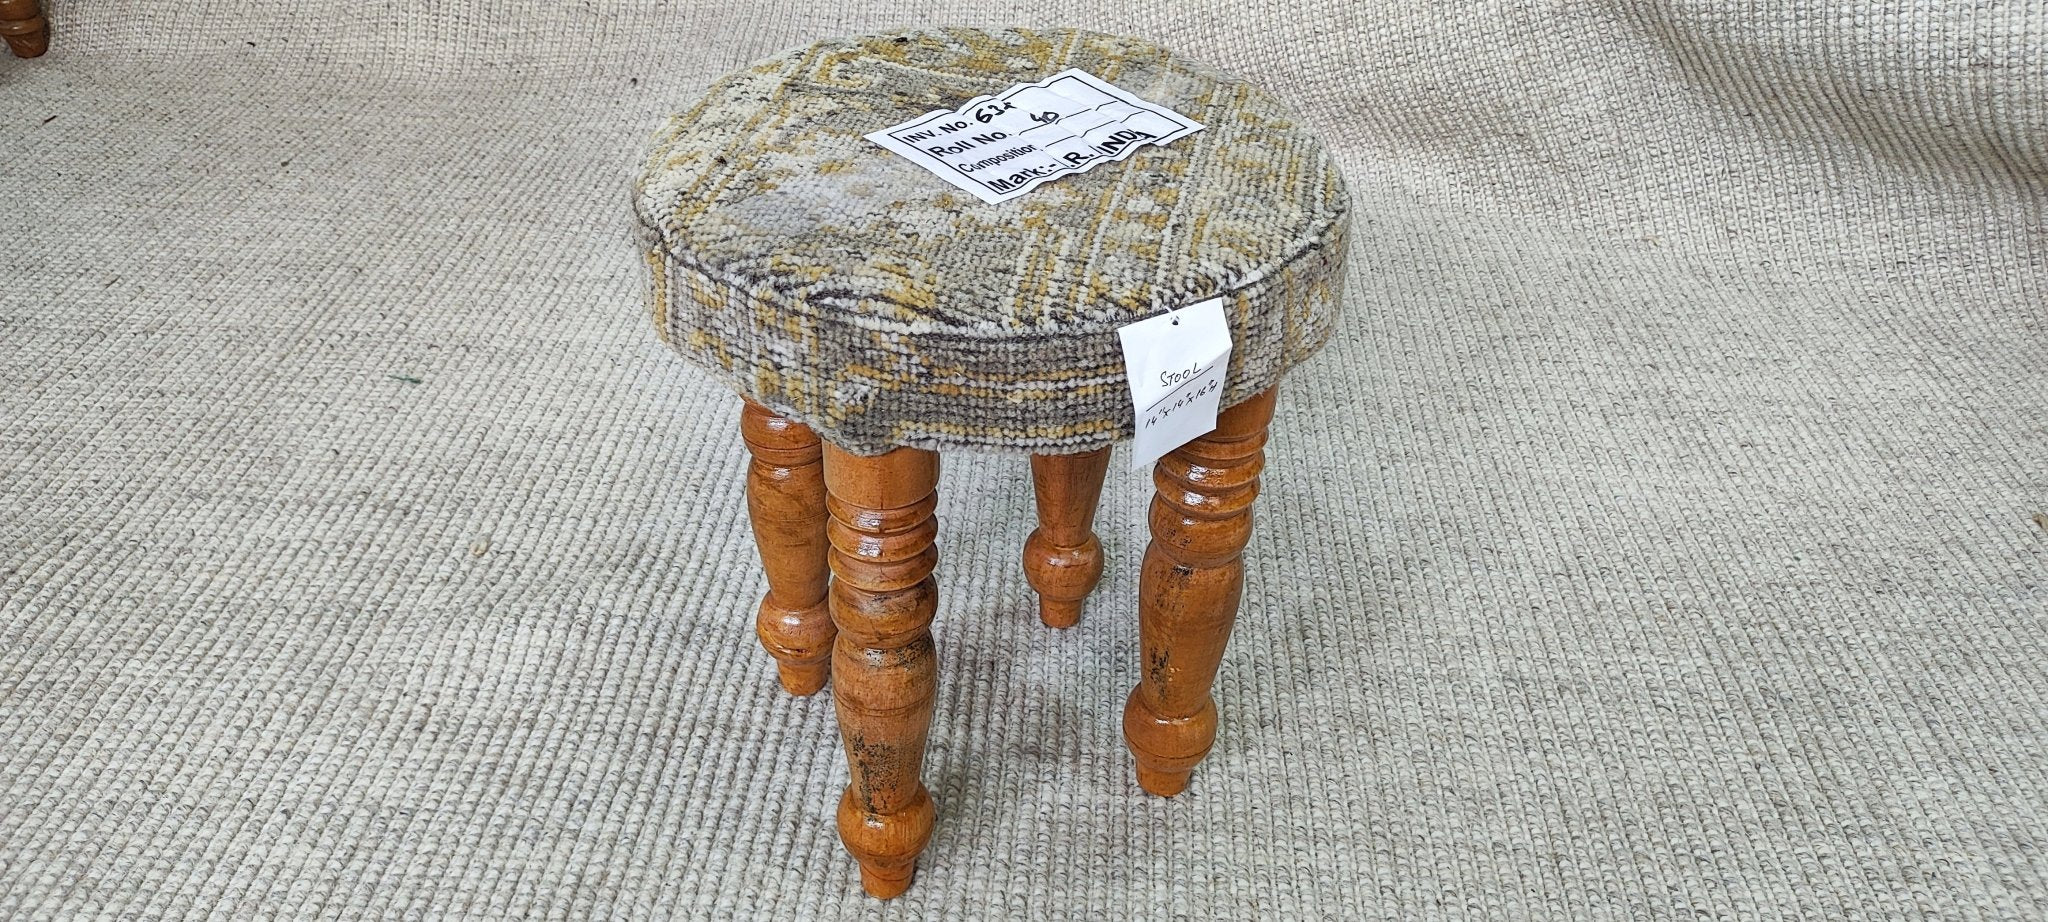 Chieko 14x14x17 Wooden Upholstered Stool | Banana Manor Rug Factory Outlet